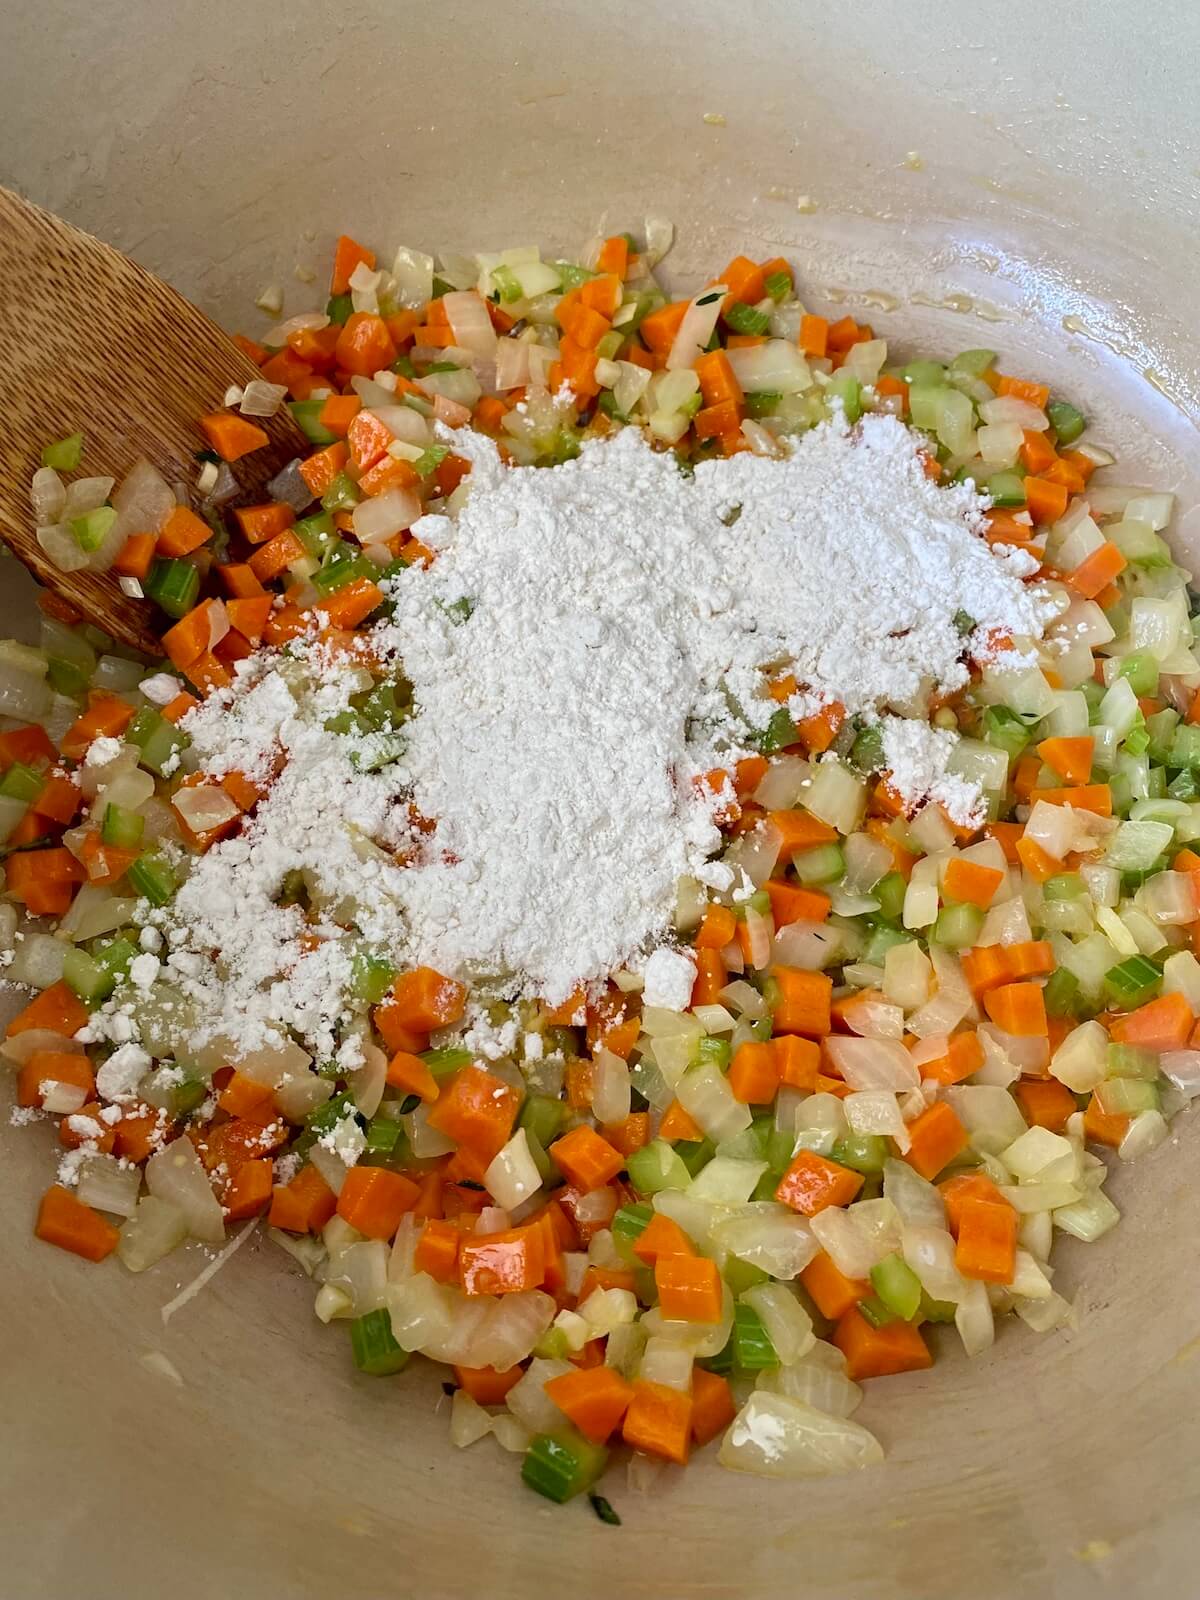 Flour sprinkled on top of the cooked vegetables to create a roux with the butter.